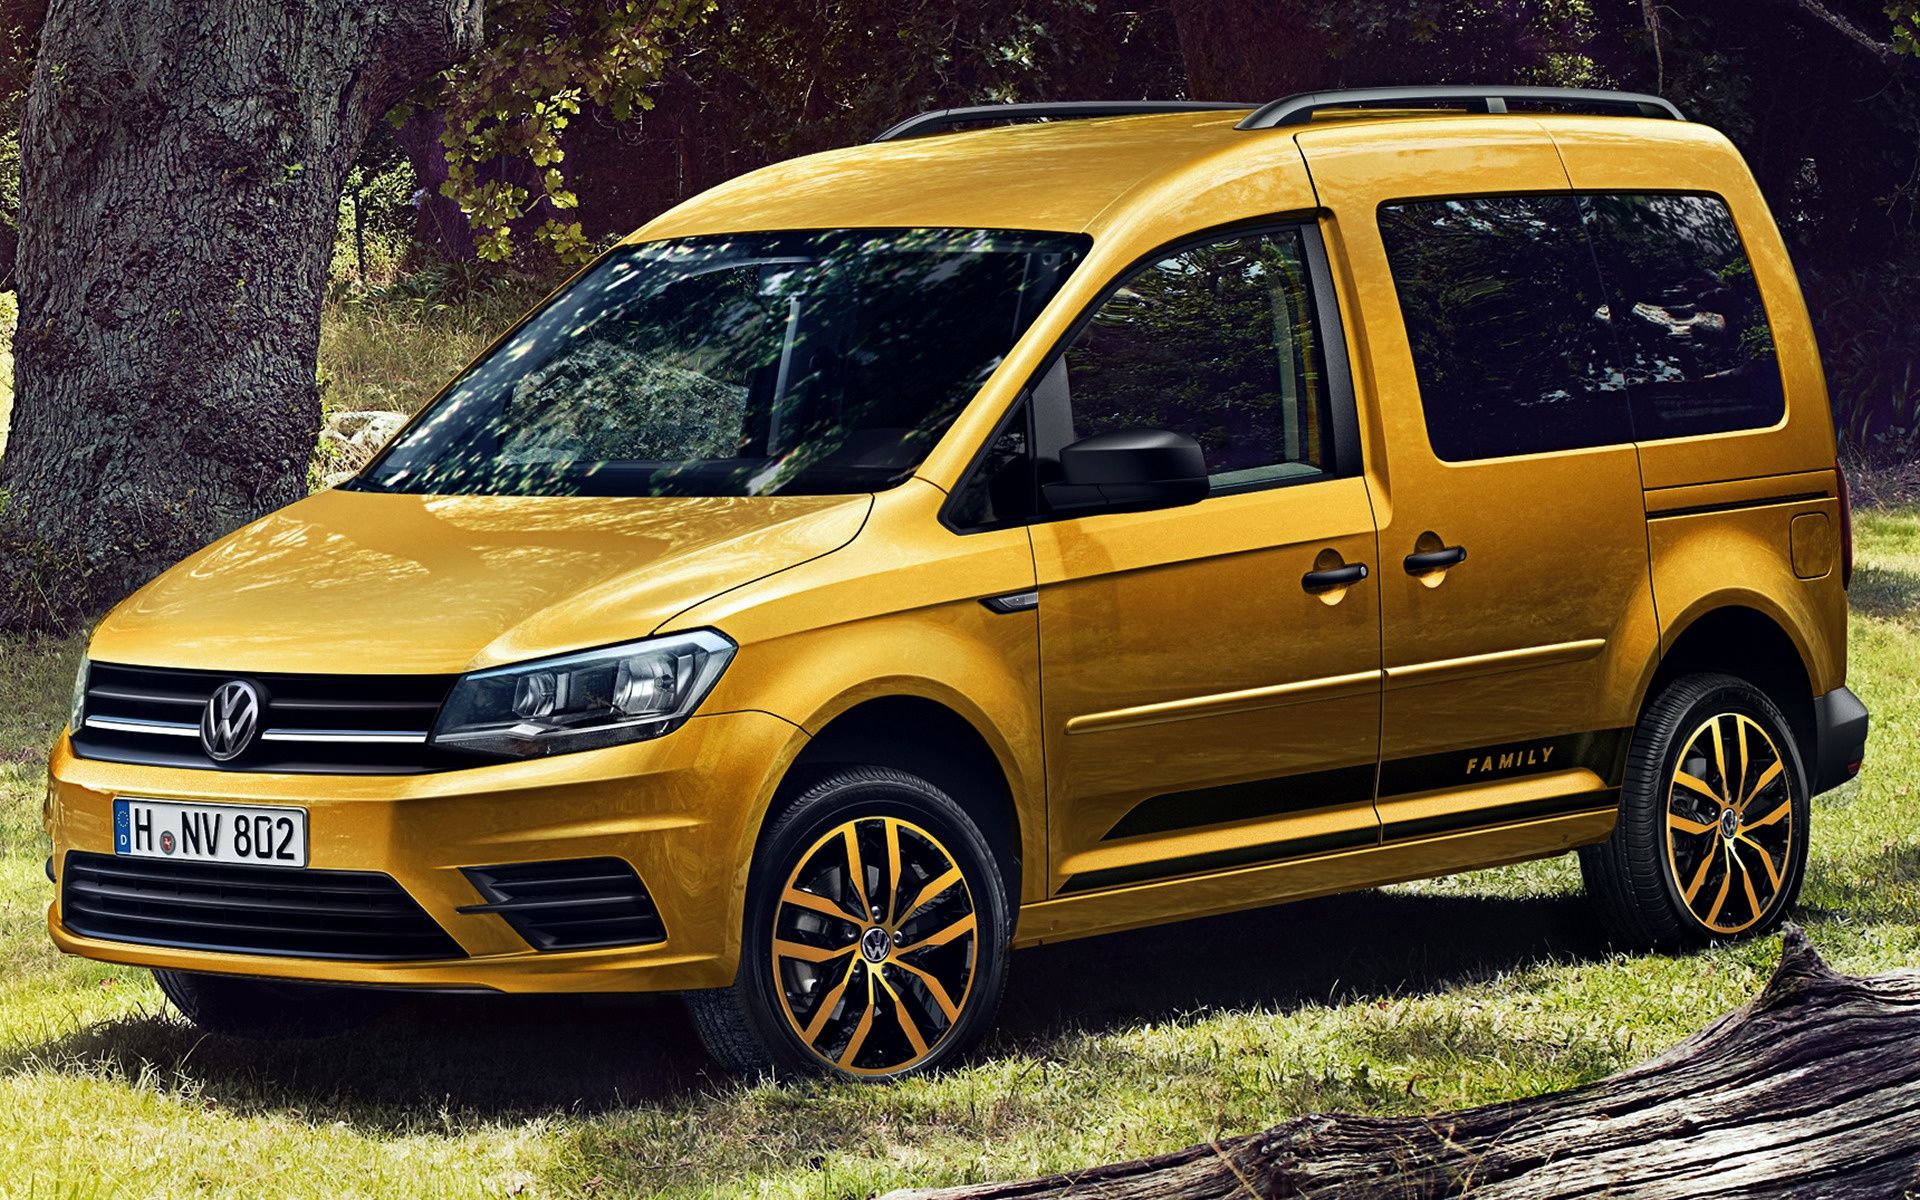 Volkswagen Caddy Family and HD Image